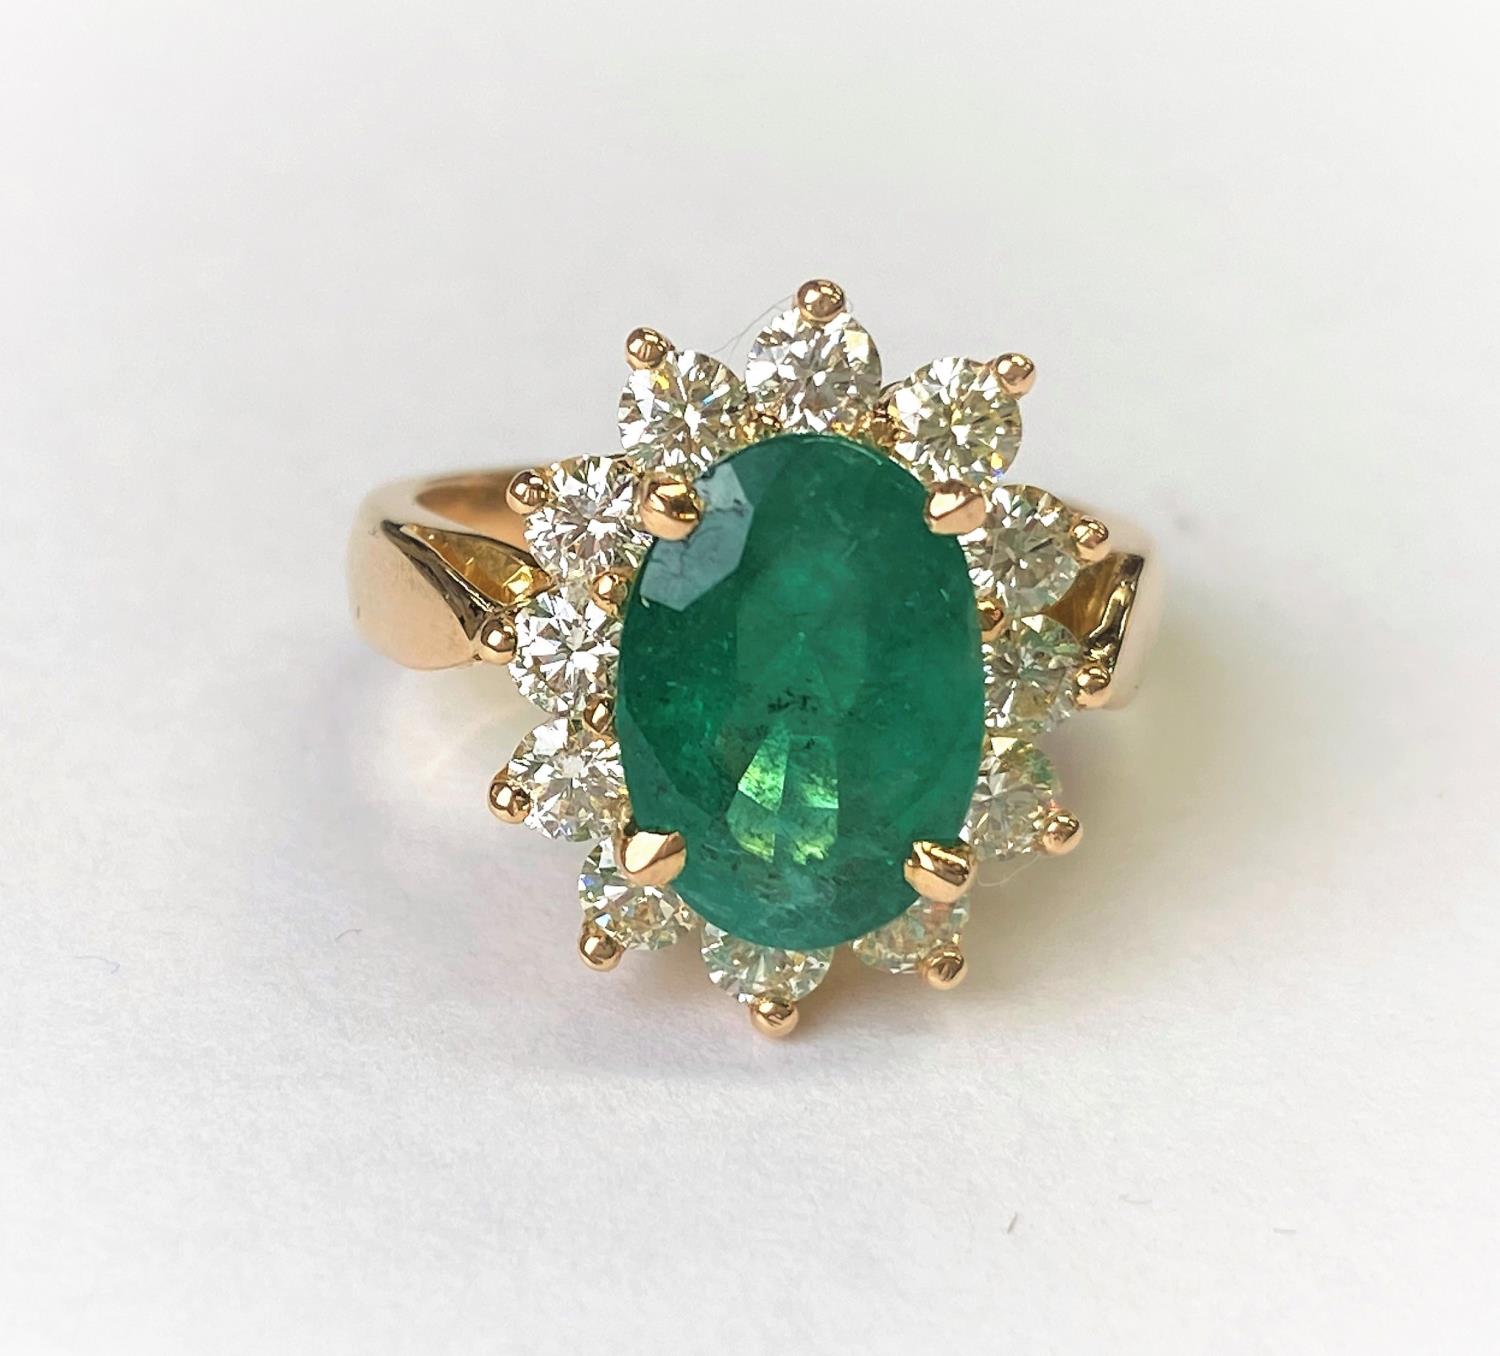 An 18ct gold dress ring set with a large faceted oval emerald, 11mm x 7mm and surrounded by 12